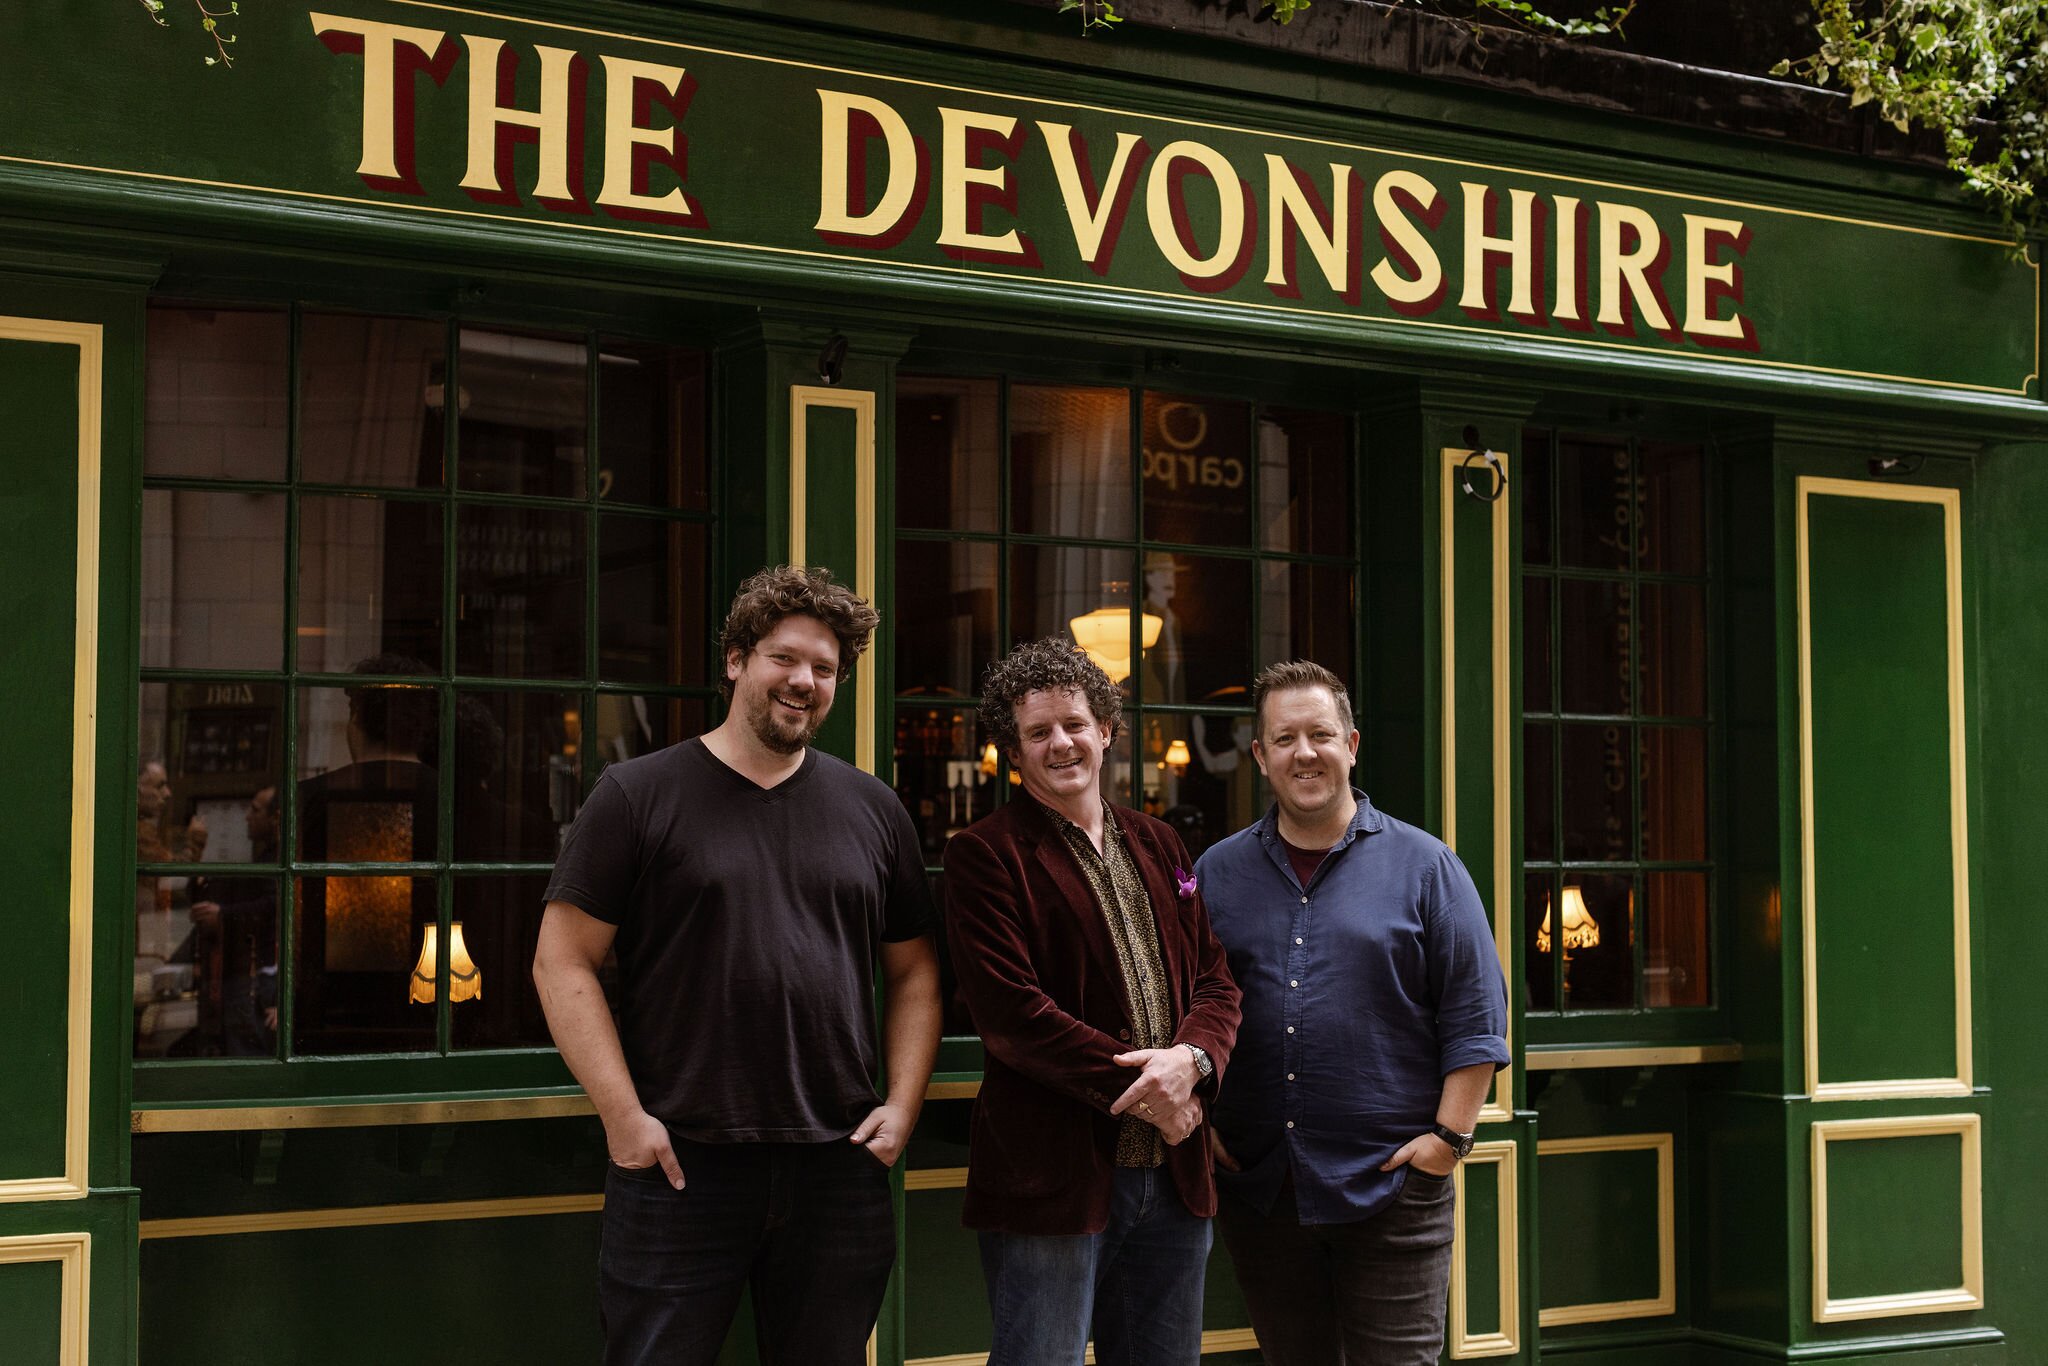 Ashley Palmer-Watts joins the Devonshire pub as co-founder